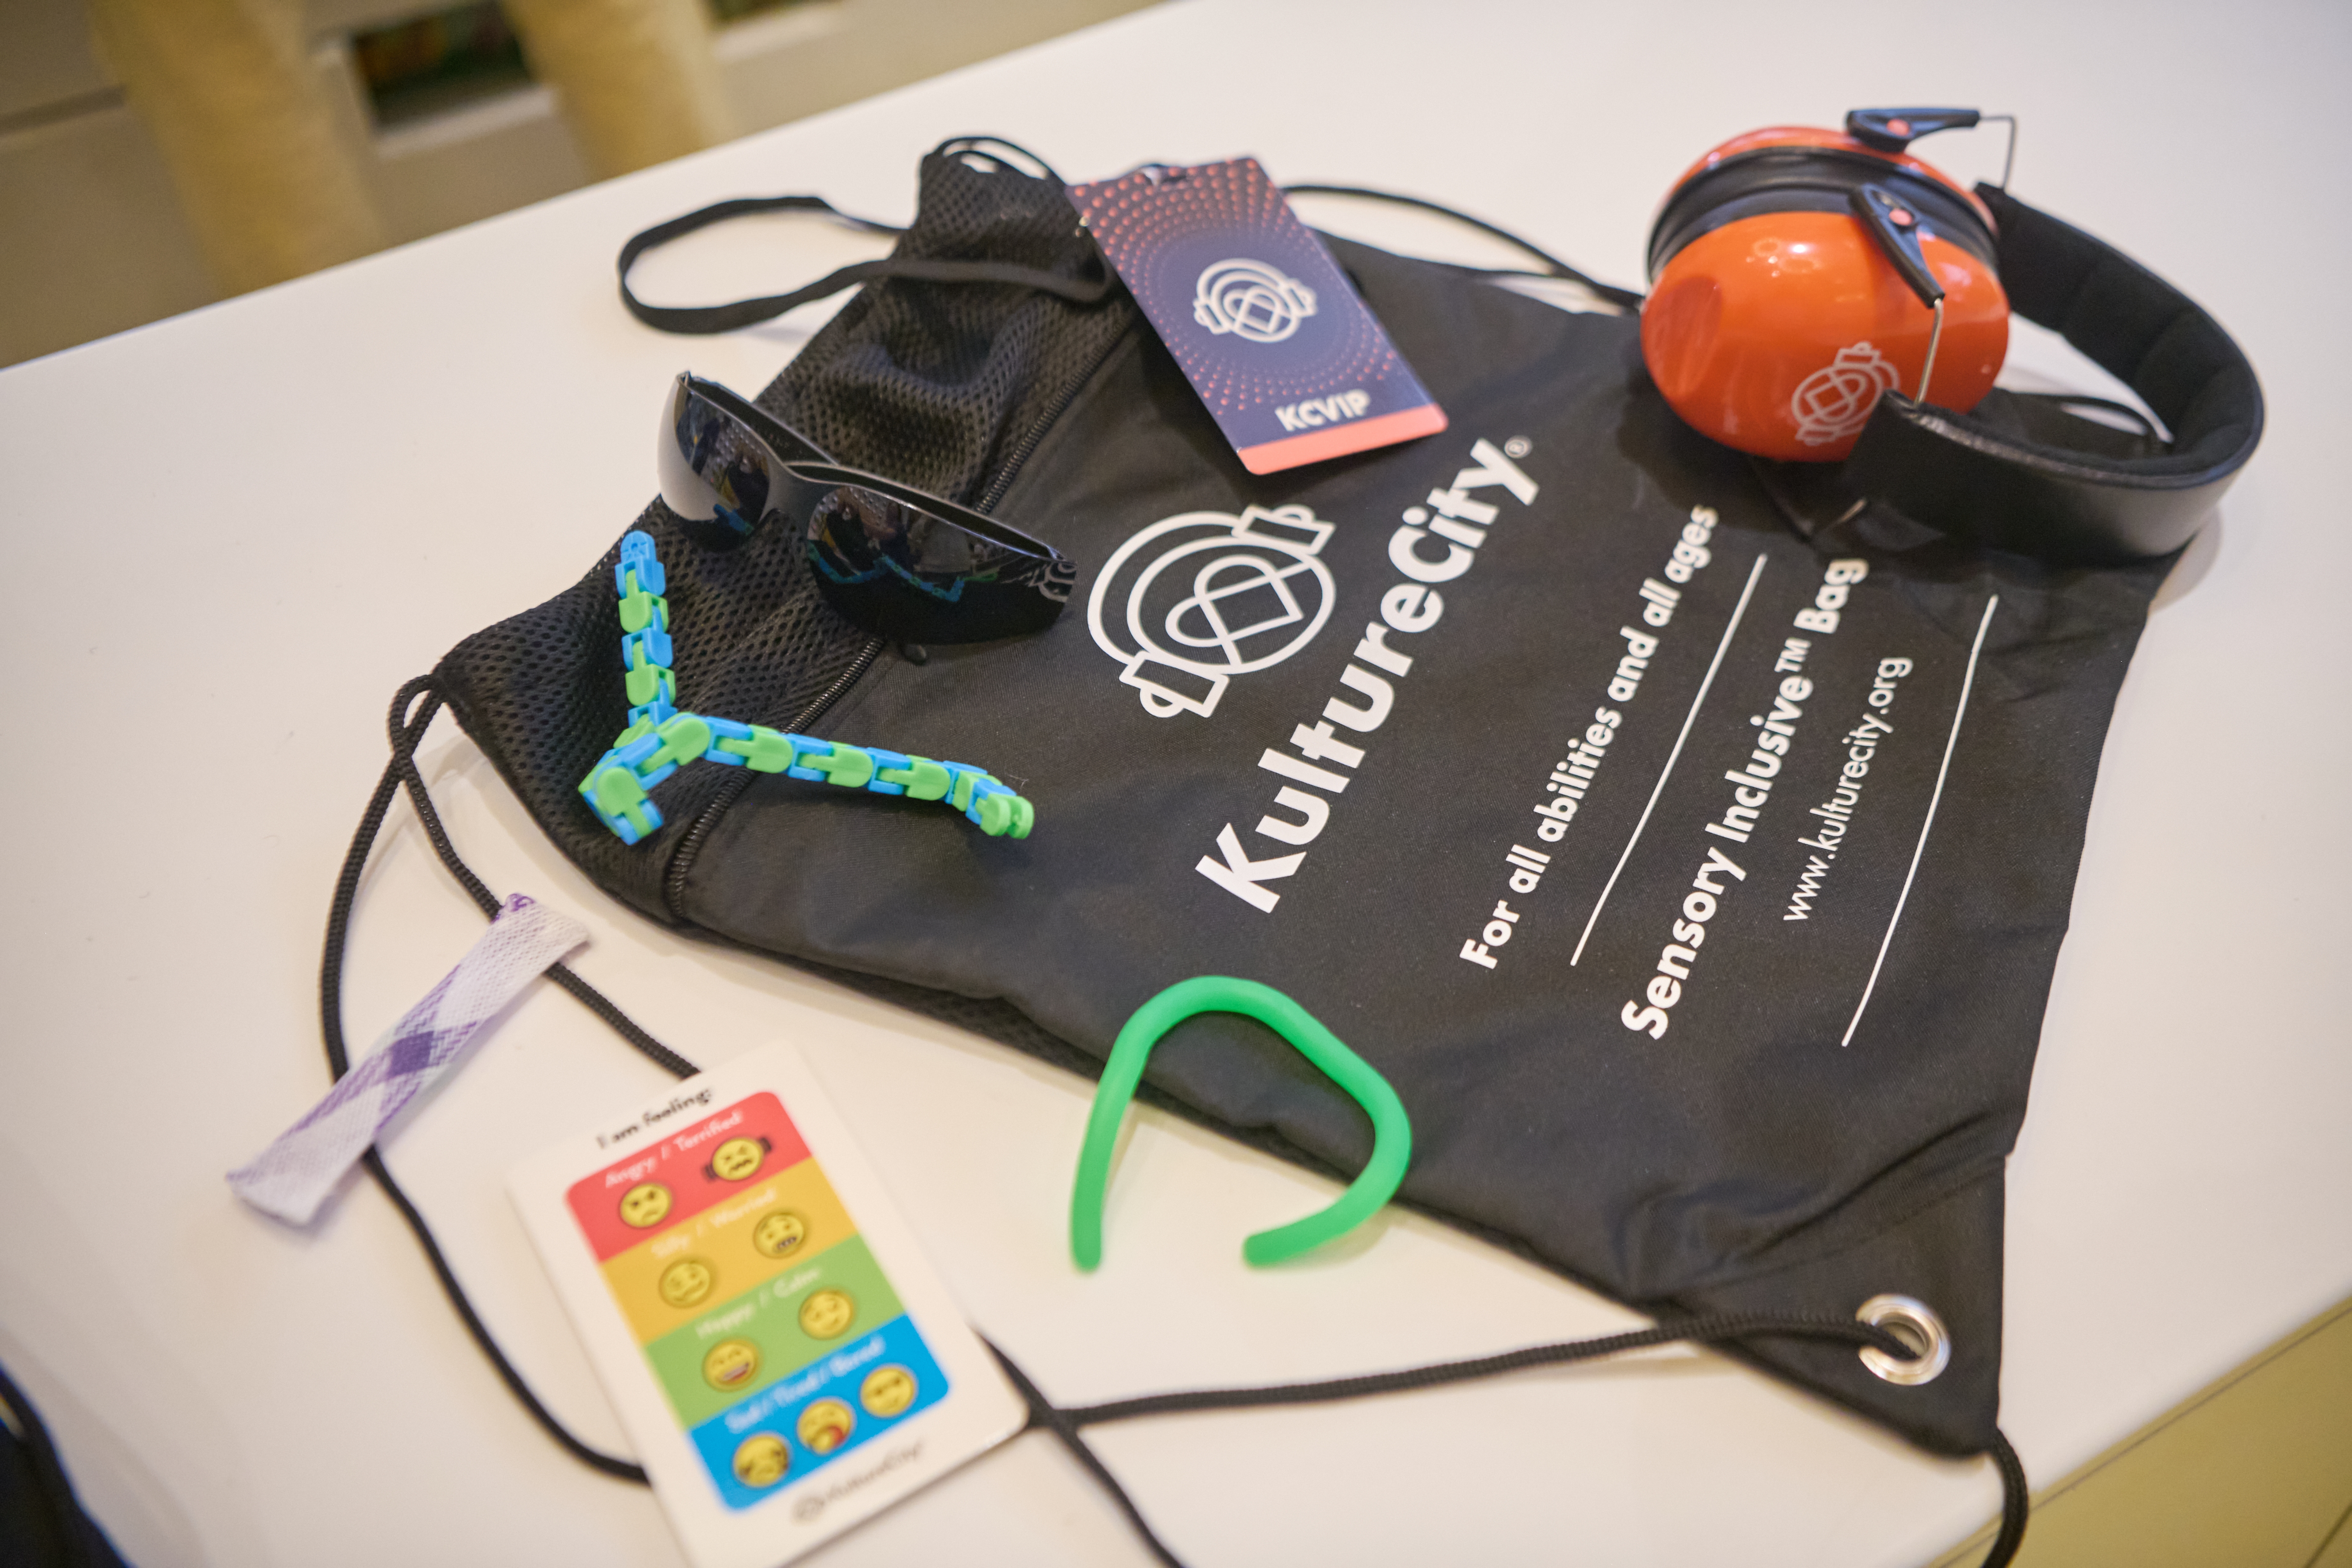 Image of the Kulture city sensory bag and what it contains including noise reducing headphones, fidget tools, visual cue cards, KultureCity branded lanyards and strobe reduction glasses